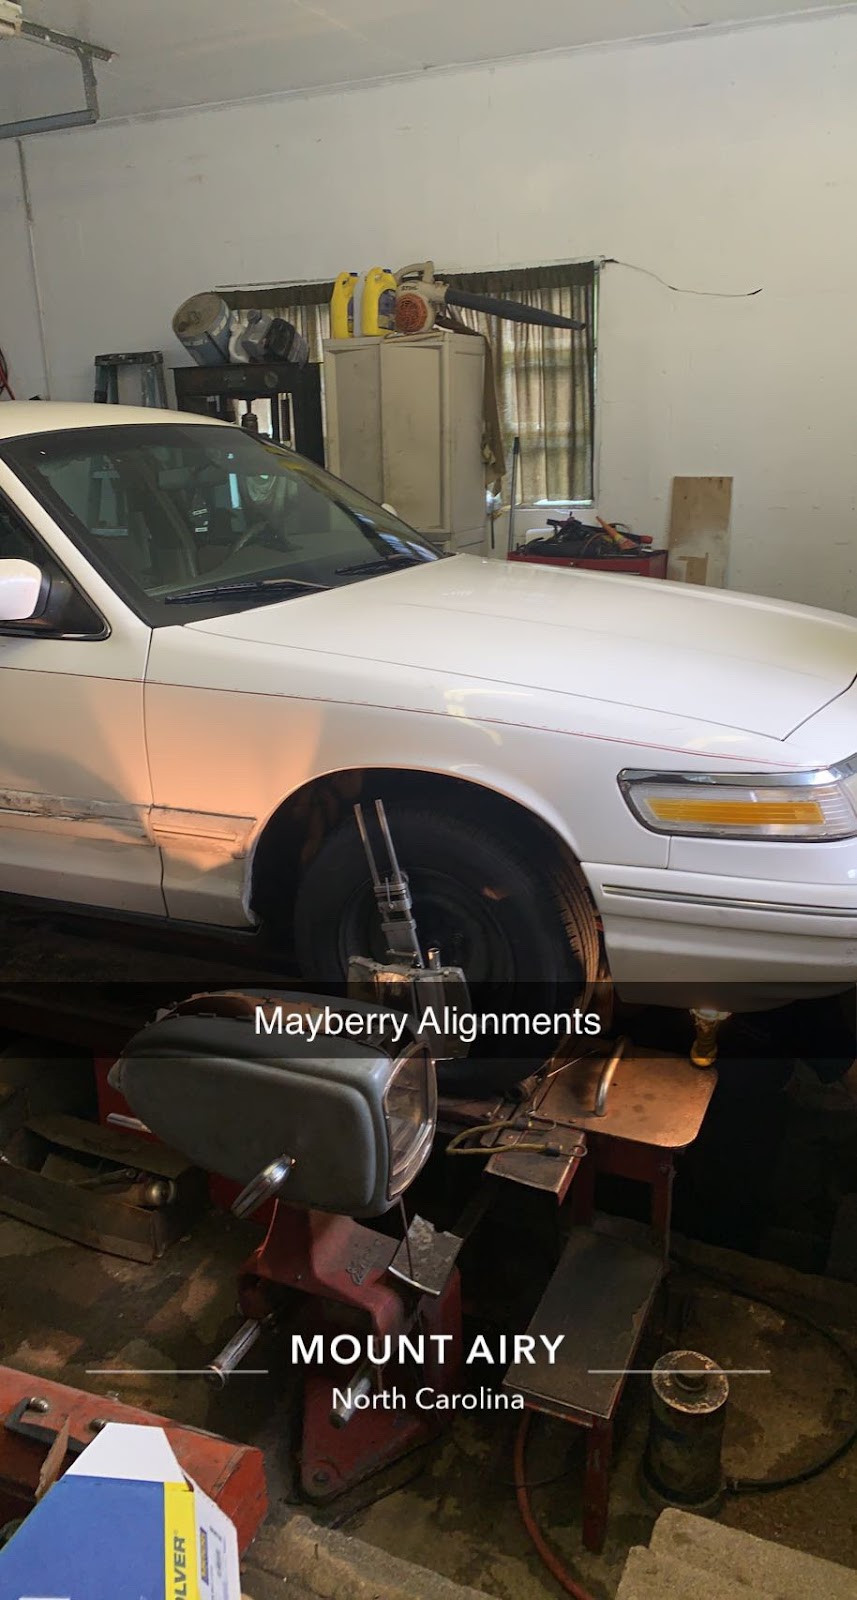 Mayberry Alignments LLC | 1067 N Franklin Rd, Mt Airy, NC 27030, USA | Phone: (336) 429-8598